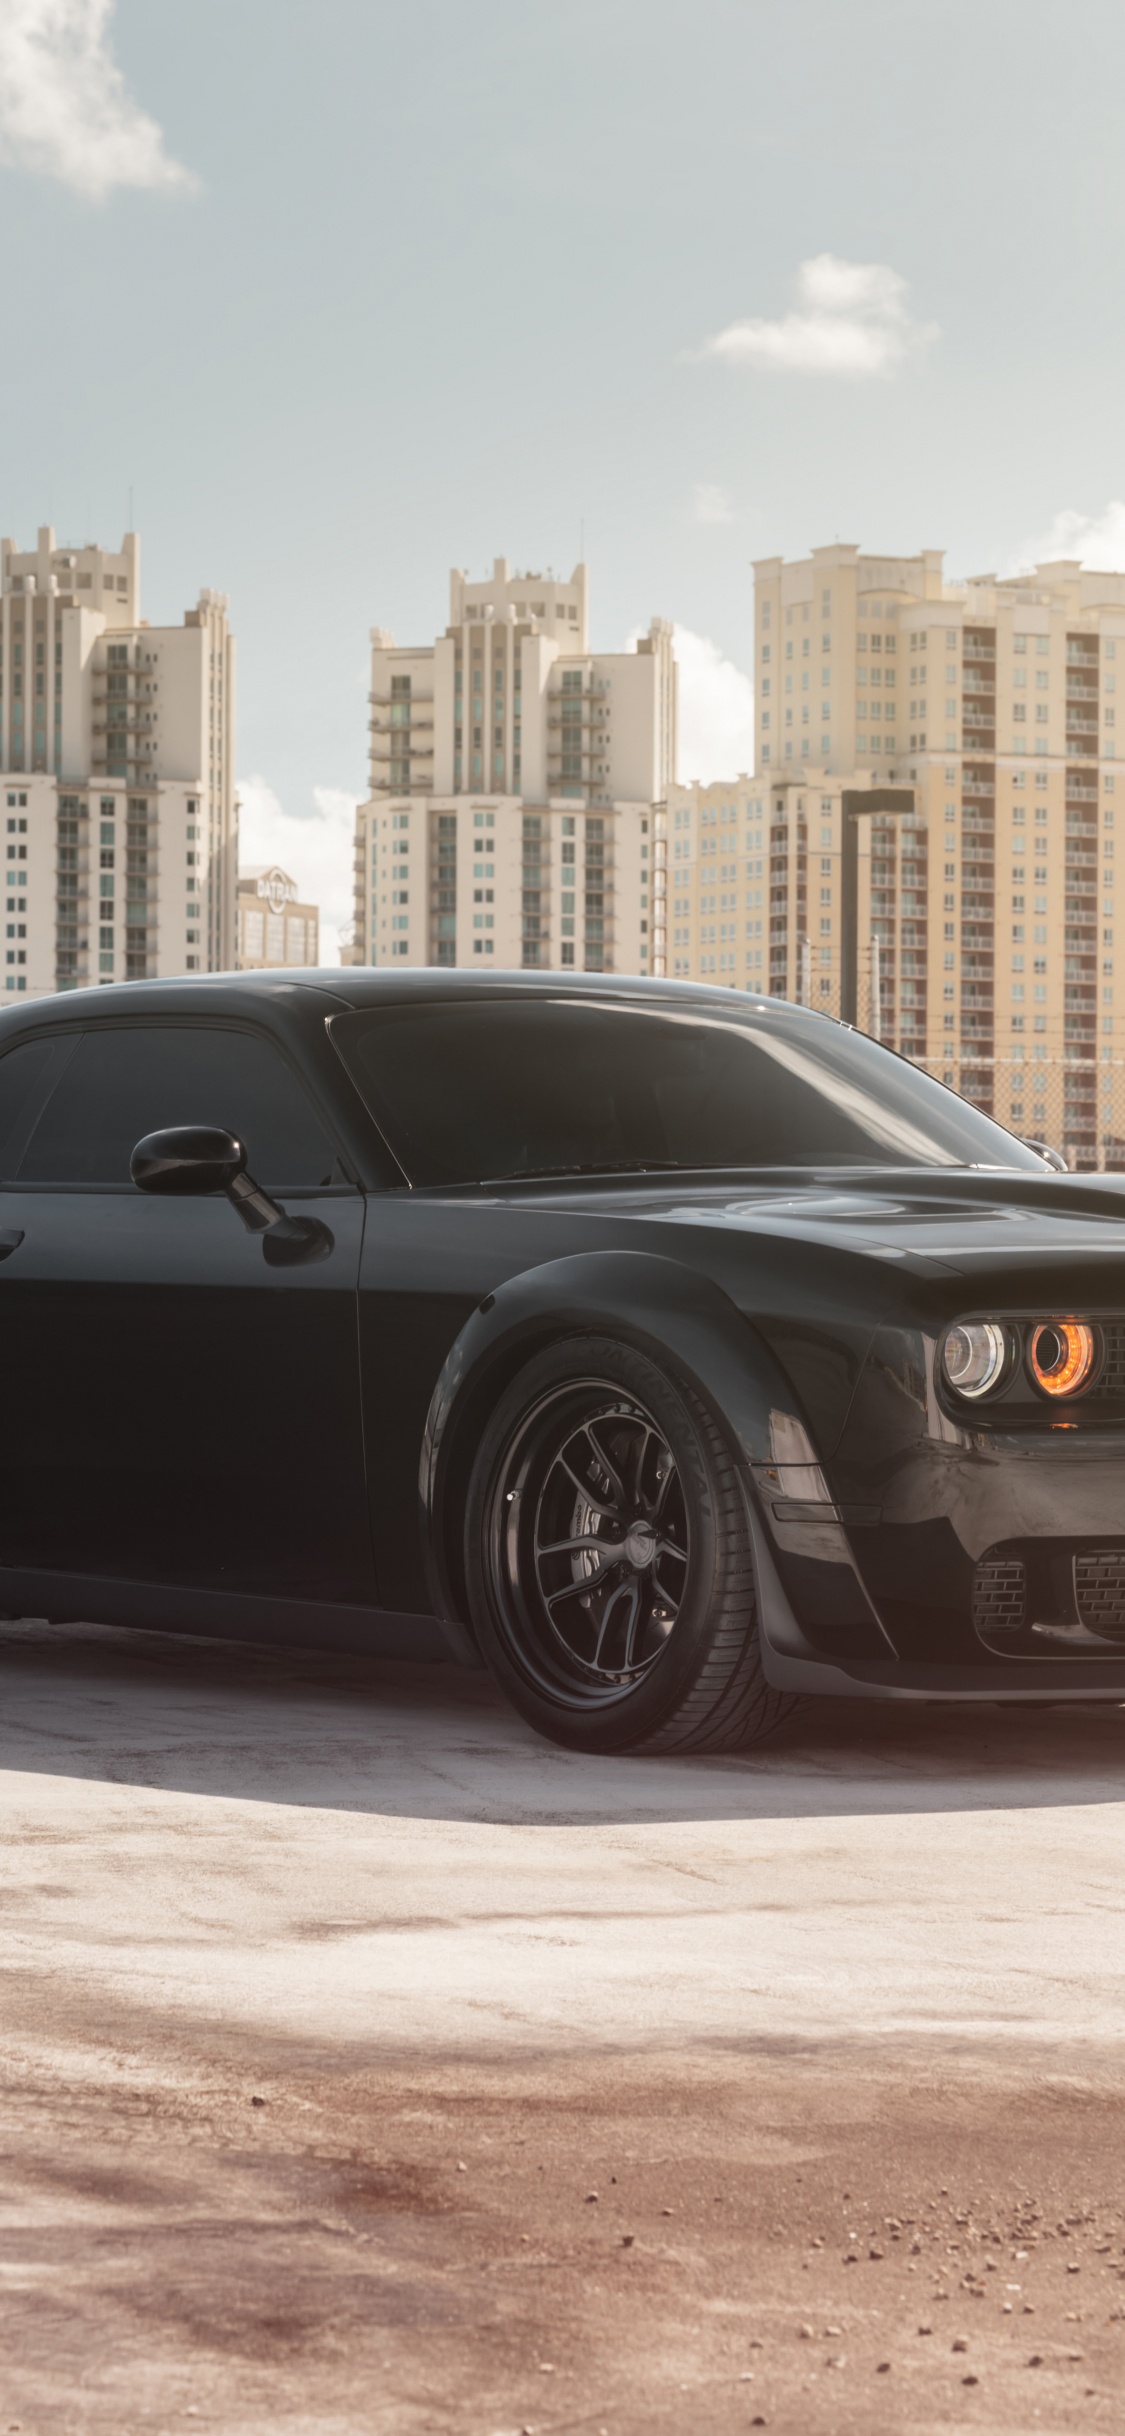 Black Coupe Parked on Gray Concrete Pavement During Daytime. Wallpaper in 1125x2436 Resolution